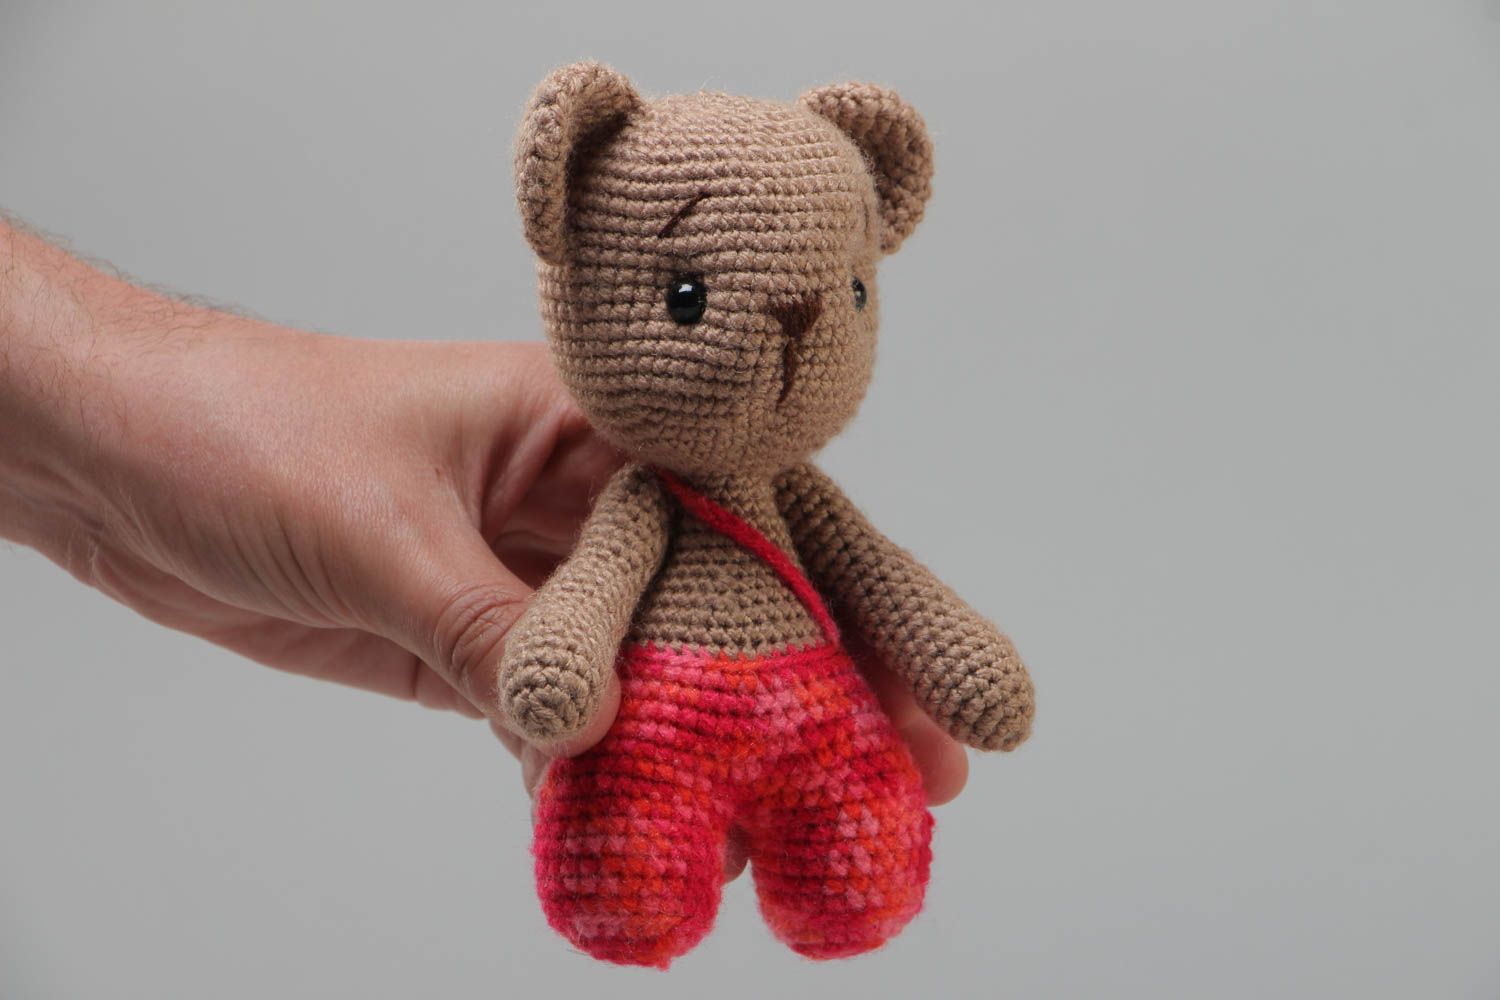 Small handcrafted soft crocheted teddybear for children made using knitting needle photo 5